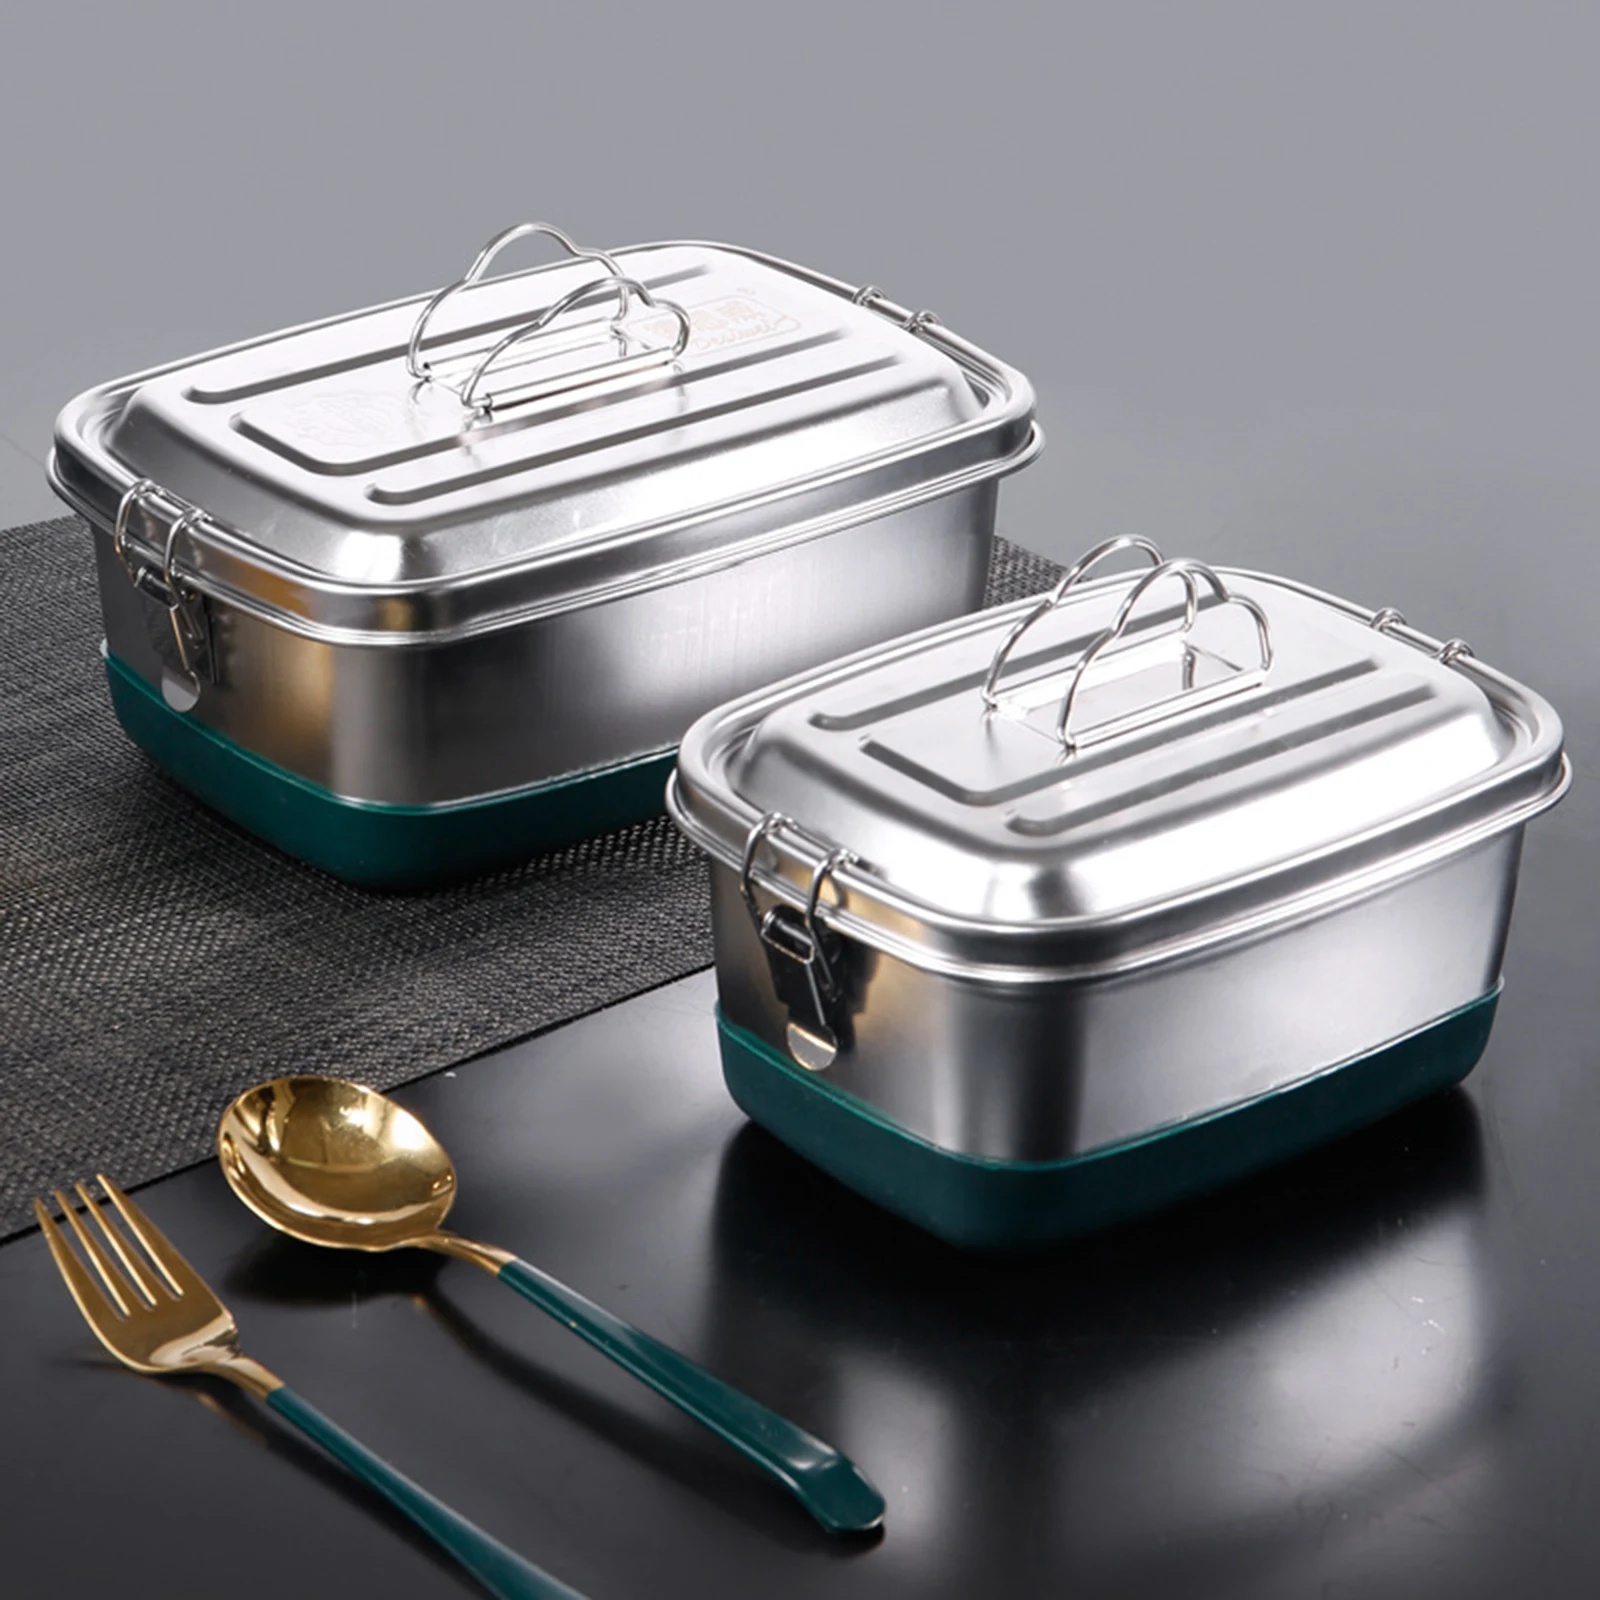 Stainless Steel Bento Lunch Food Box Container, Large Metal Bento Lunch Box Container for Kids or Adults - Dishwasher Safe